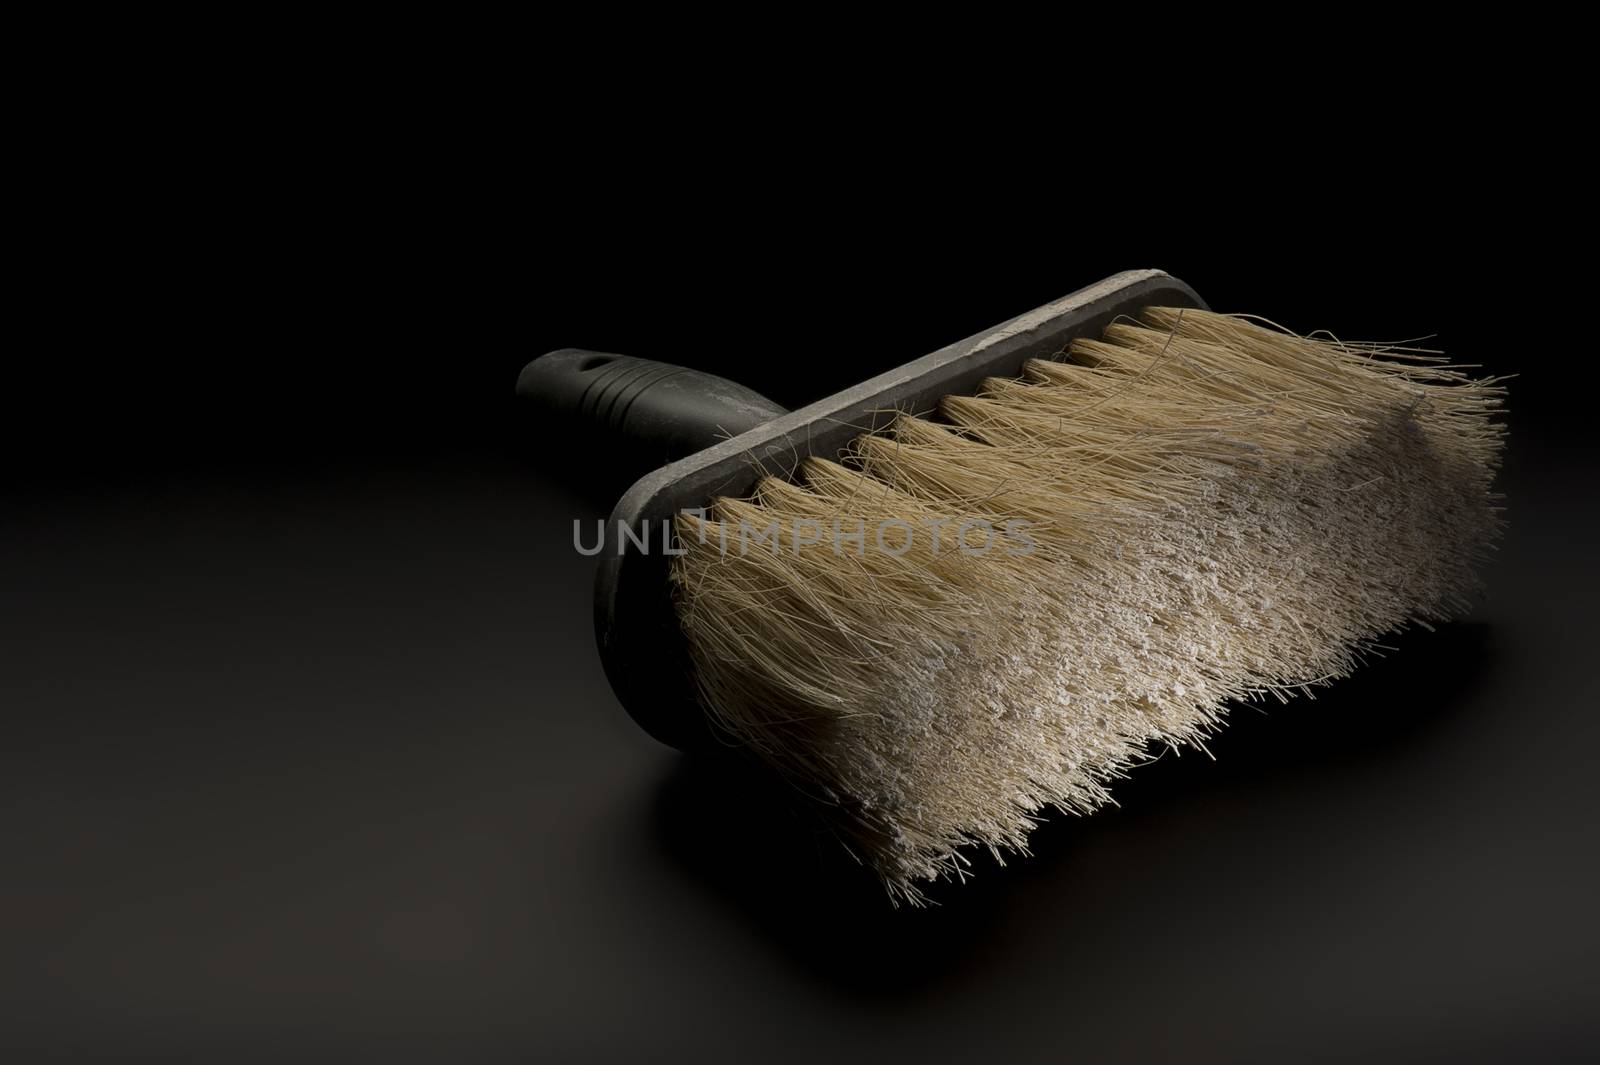 Close up view of a new clean large paintbrush or wallpapering brush lying on a dark background conceptual of DIY, home renovations, building and construction or interior decoration